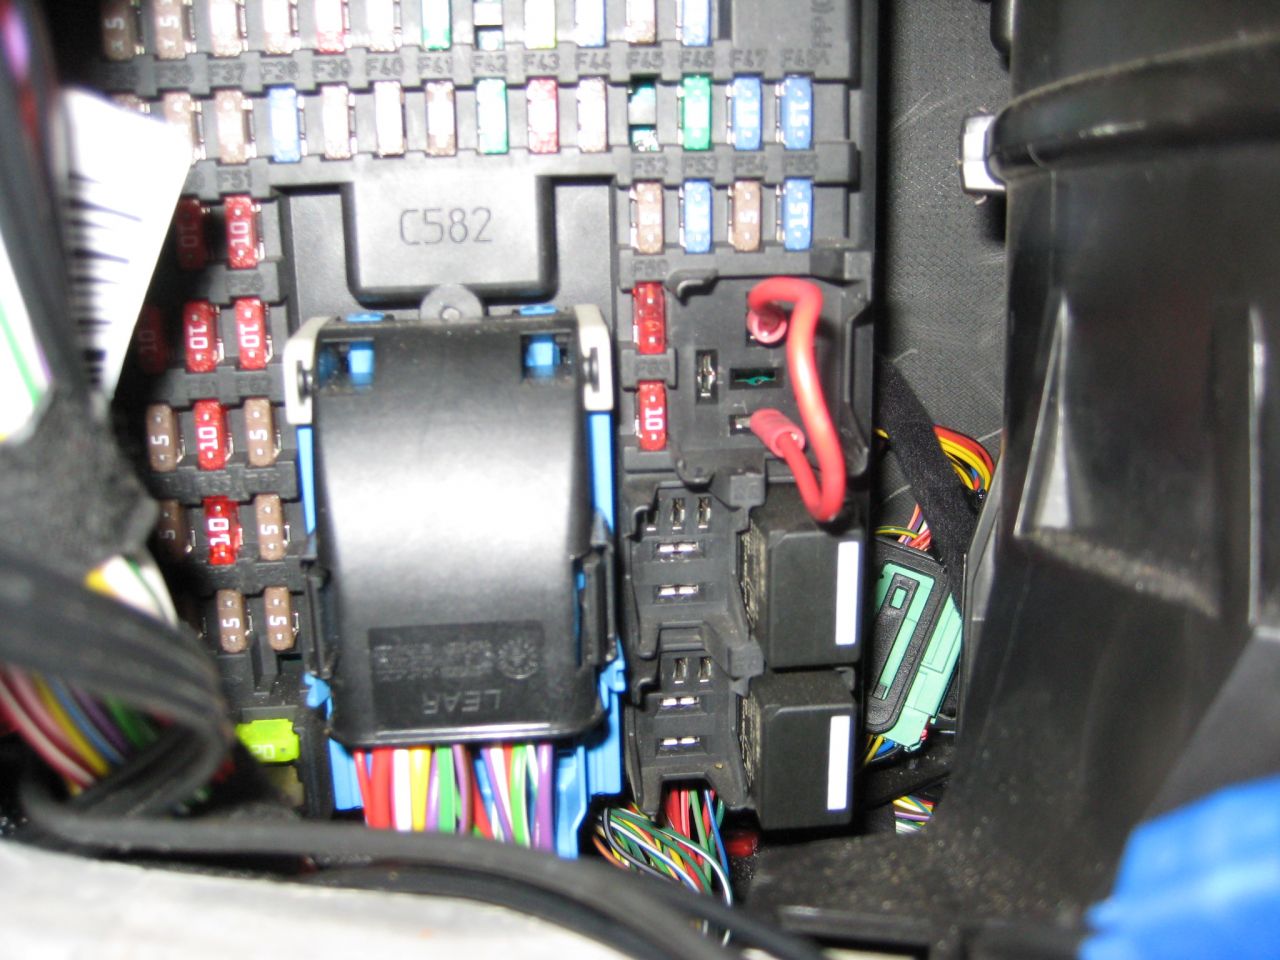 Rear Cigarette Lighter not working - Land Rover Forums ... 2006 fleetwood bounder wiring schematic 